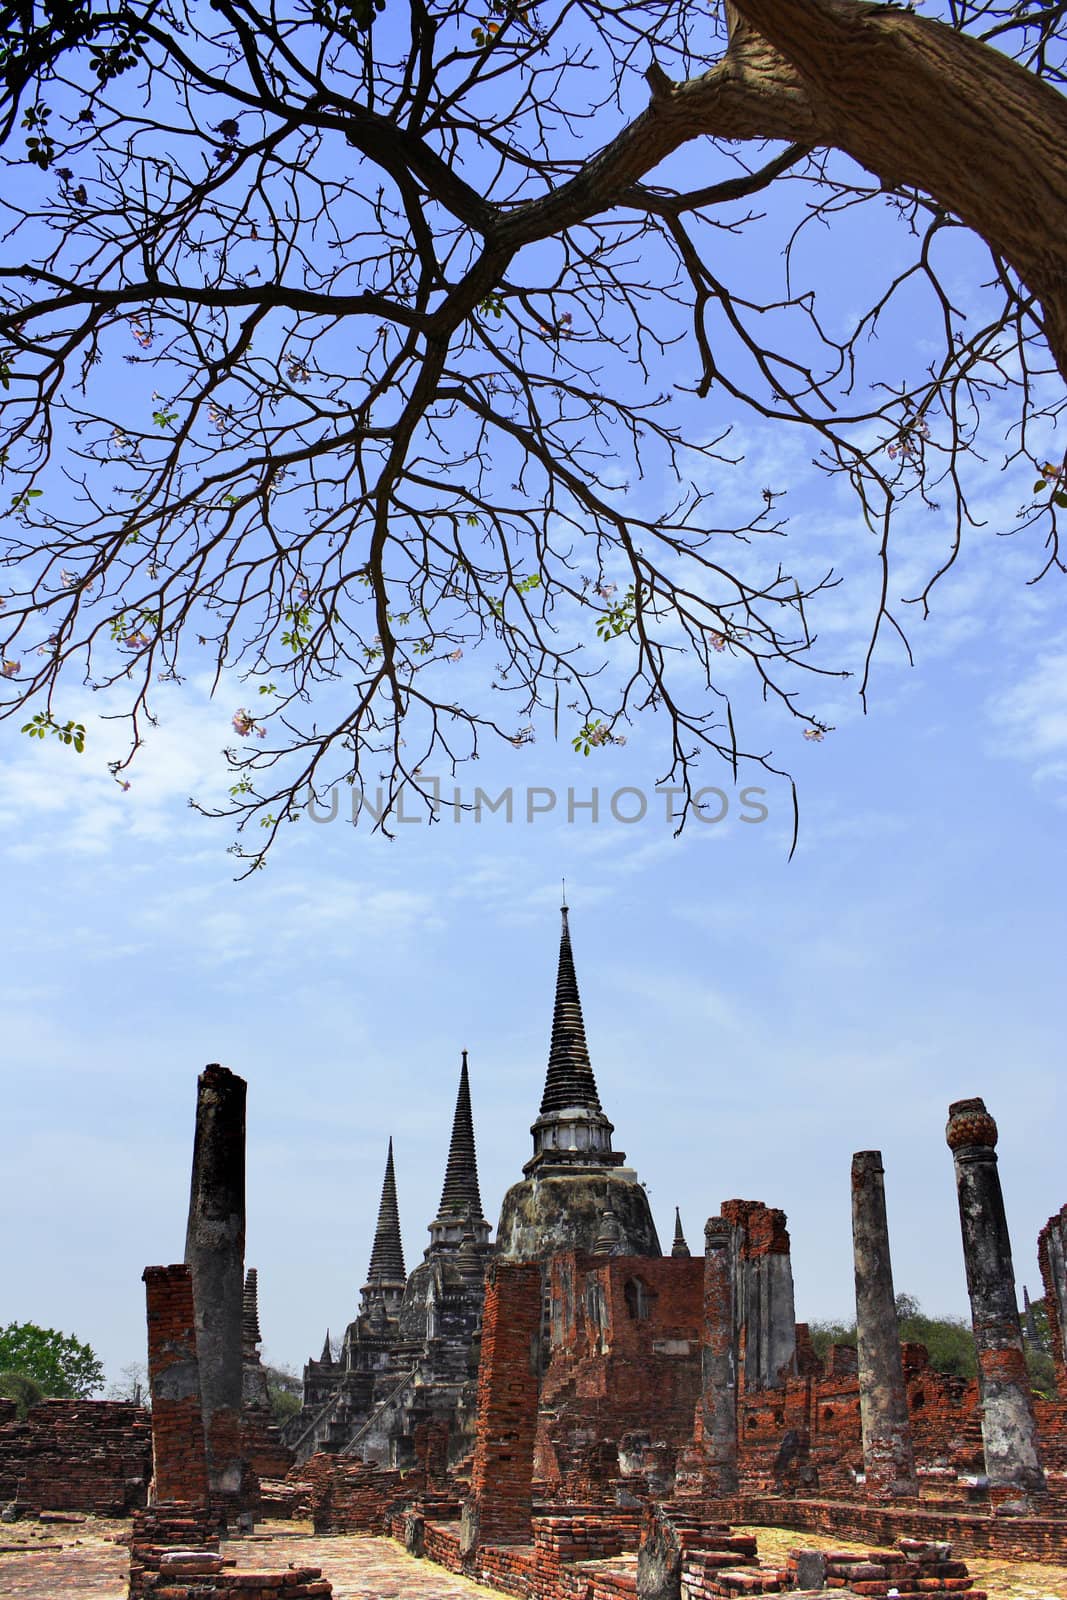 Old Siam Temple of Ayutthaya, Thailand (UNESCO word heritage)